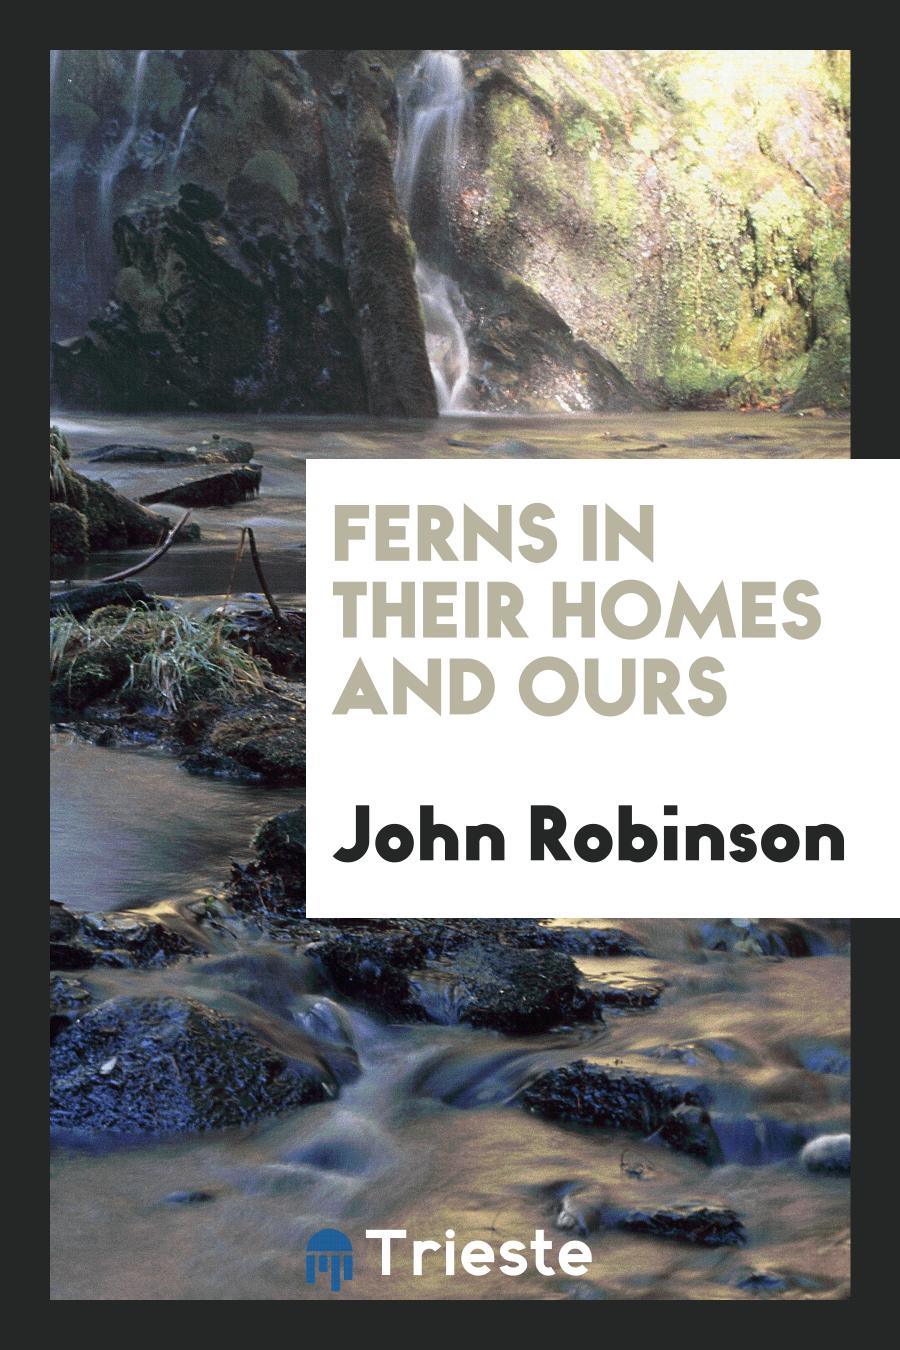 Ferns in Their Homes and Ours